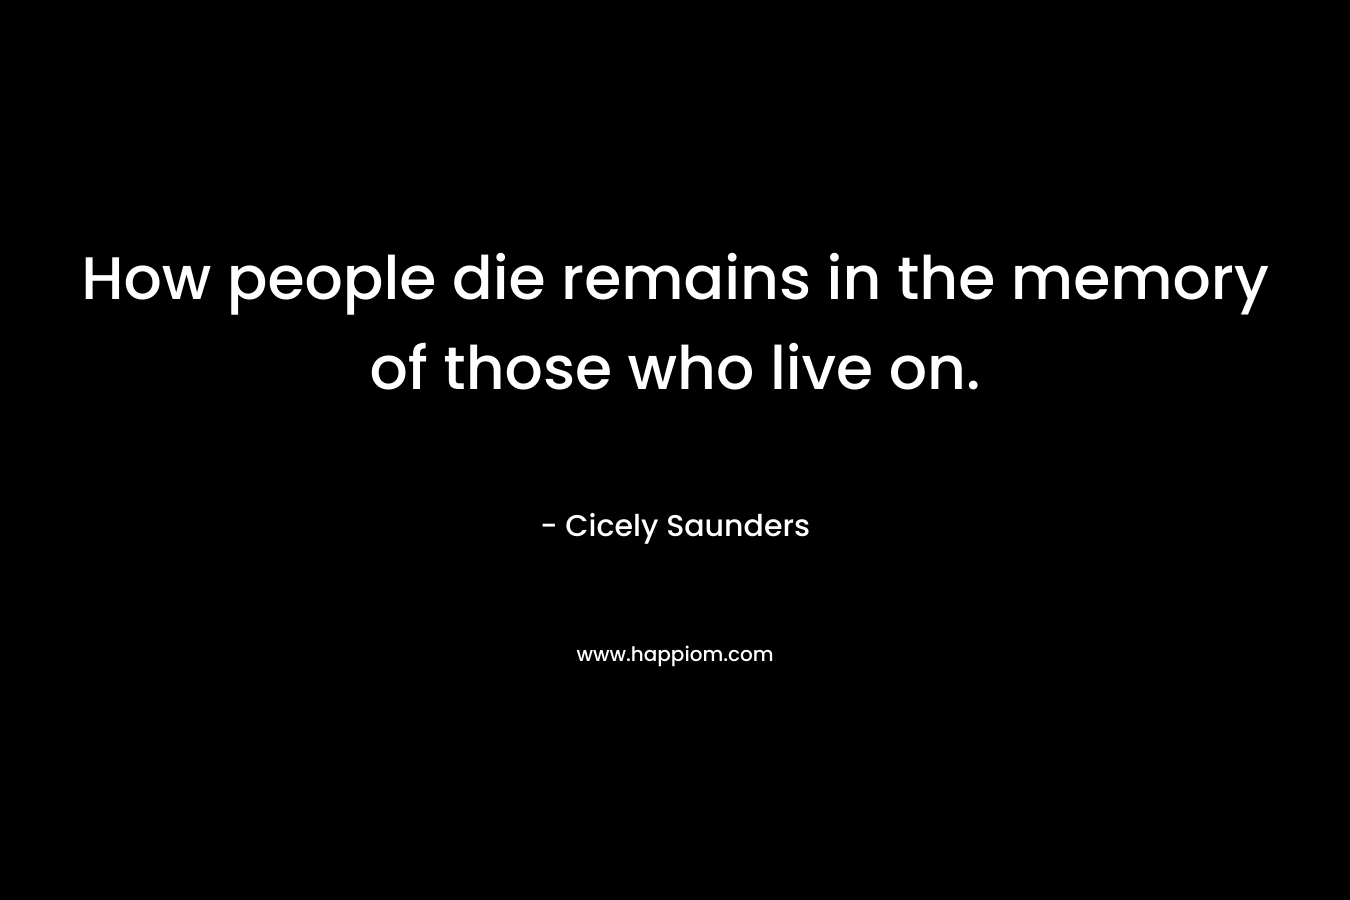 How people die remains in the memory of those who live on. – Cicely Saunders